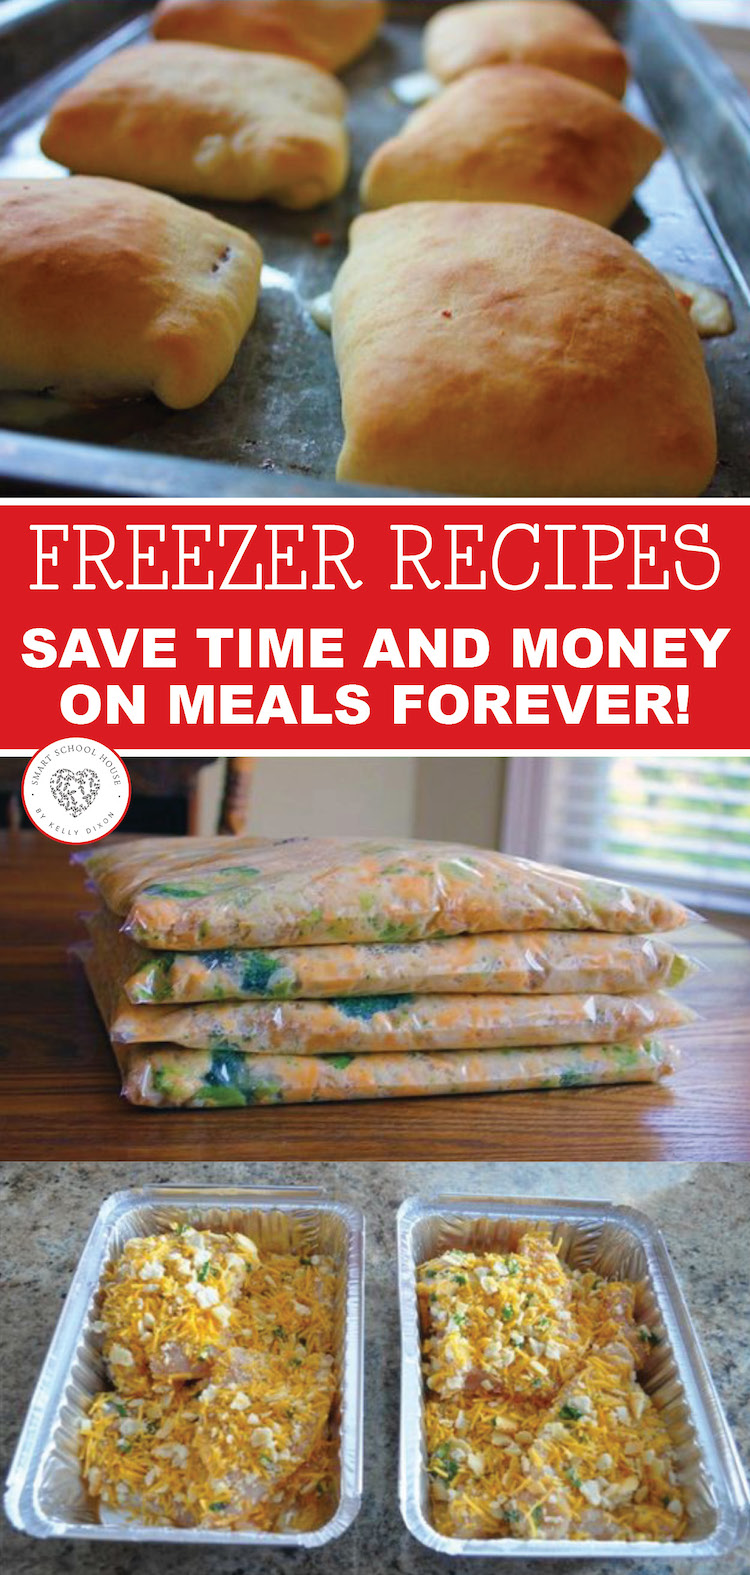 Make Ahead Freezer Meals - homemade recipes and ideas to save time and money.